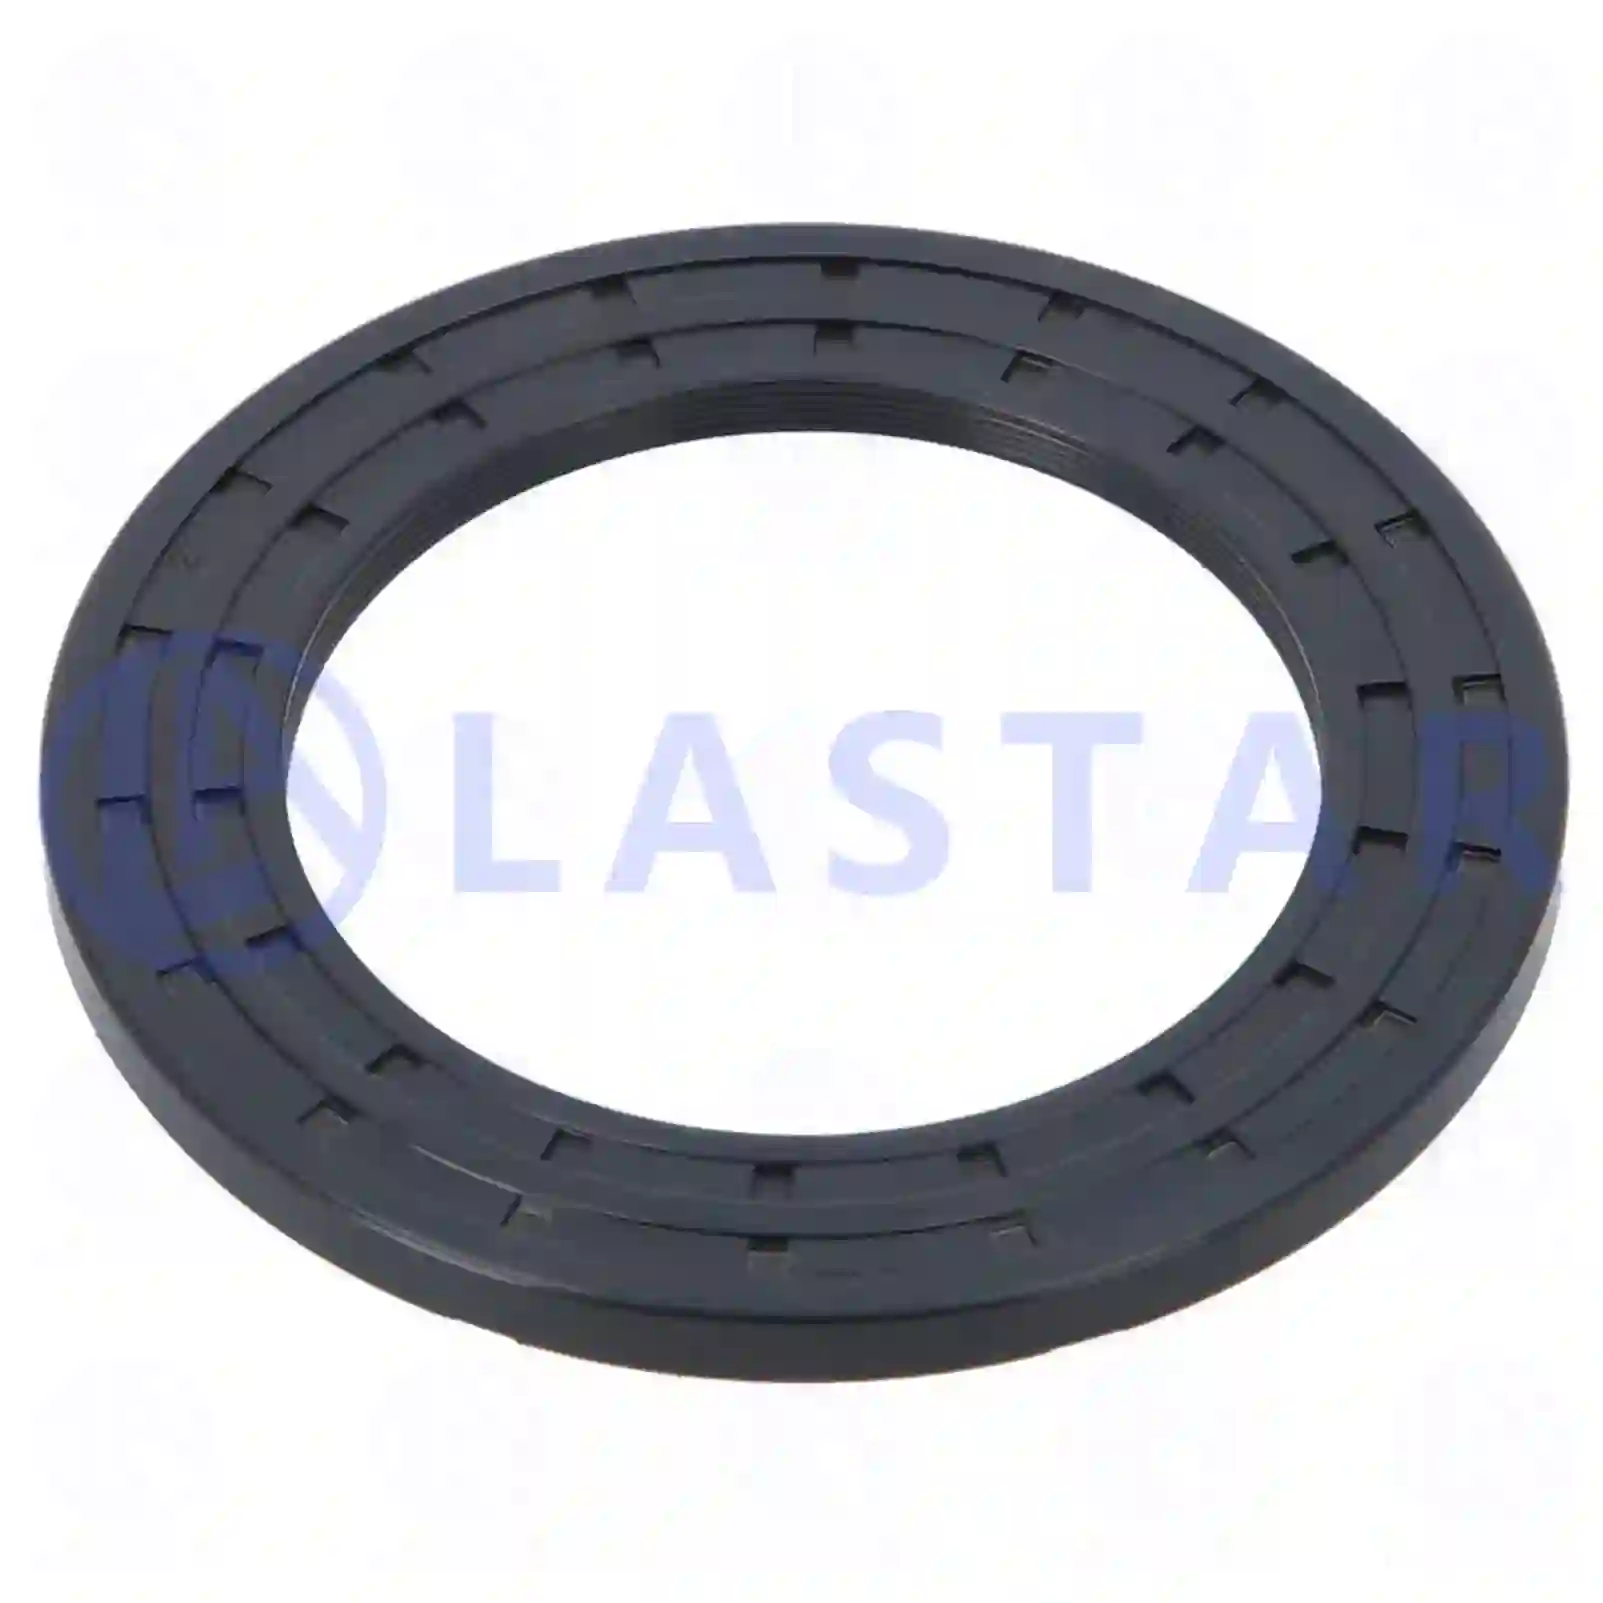 Seal ring, cabin suspension, 77735273, 1399159, ZG41505-0008, ||  77735273 Lastar Spare Part | Truck Spare Parts, Auotomotive Spare Parts Seal ring, cabin suspension, 77735273, 1399159, ZG41505-0008, ||  77735273 Lastar Spare Part | Truck Spare Parts, Auotomotive Spare Parts